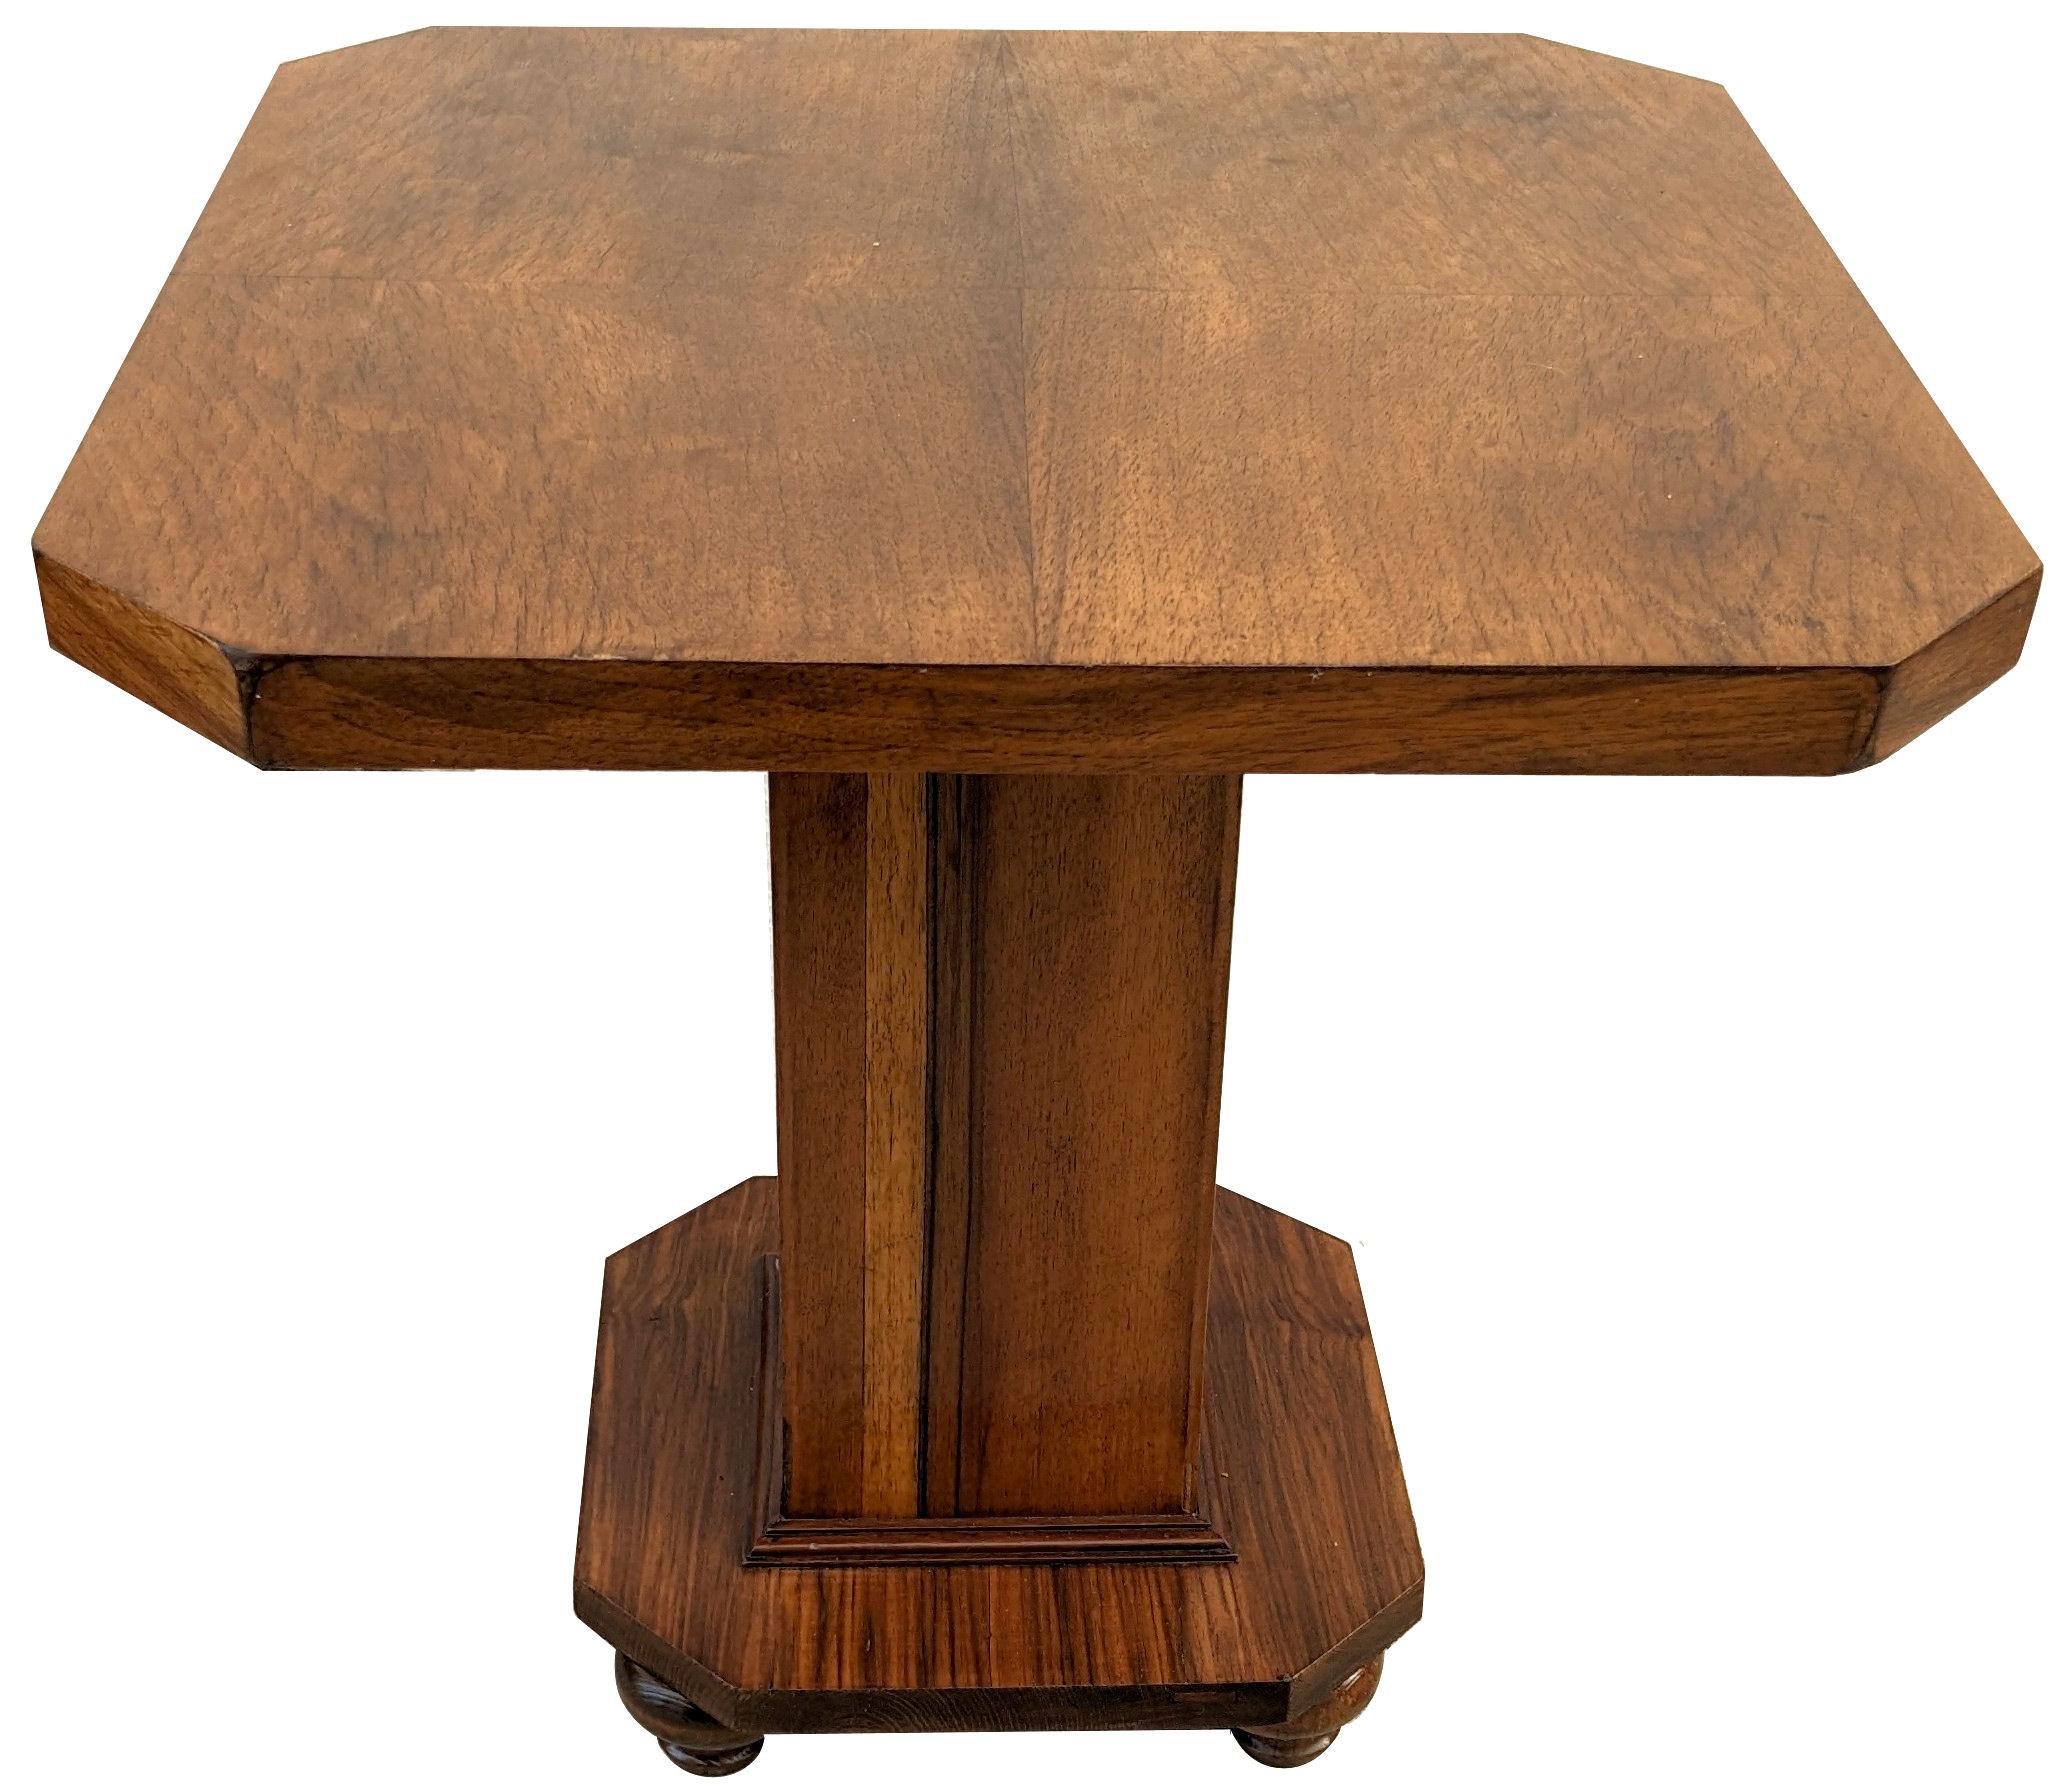 Fabulous and original 1930's Art Deco walnut occasional table. This table is ideal for modern day use either as a coffee table or centre table. Condition is very good having been through our workshops and fully and professionally restored to